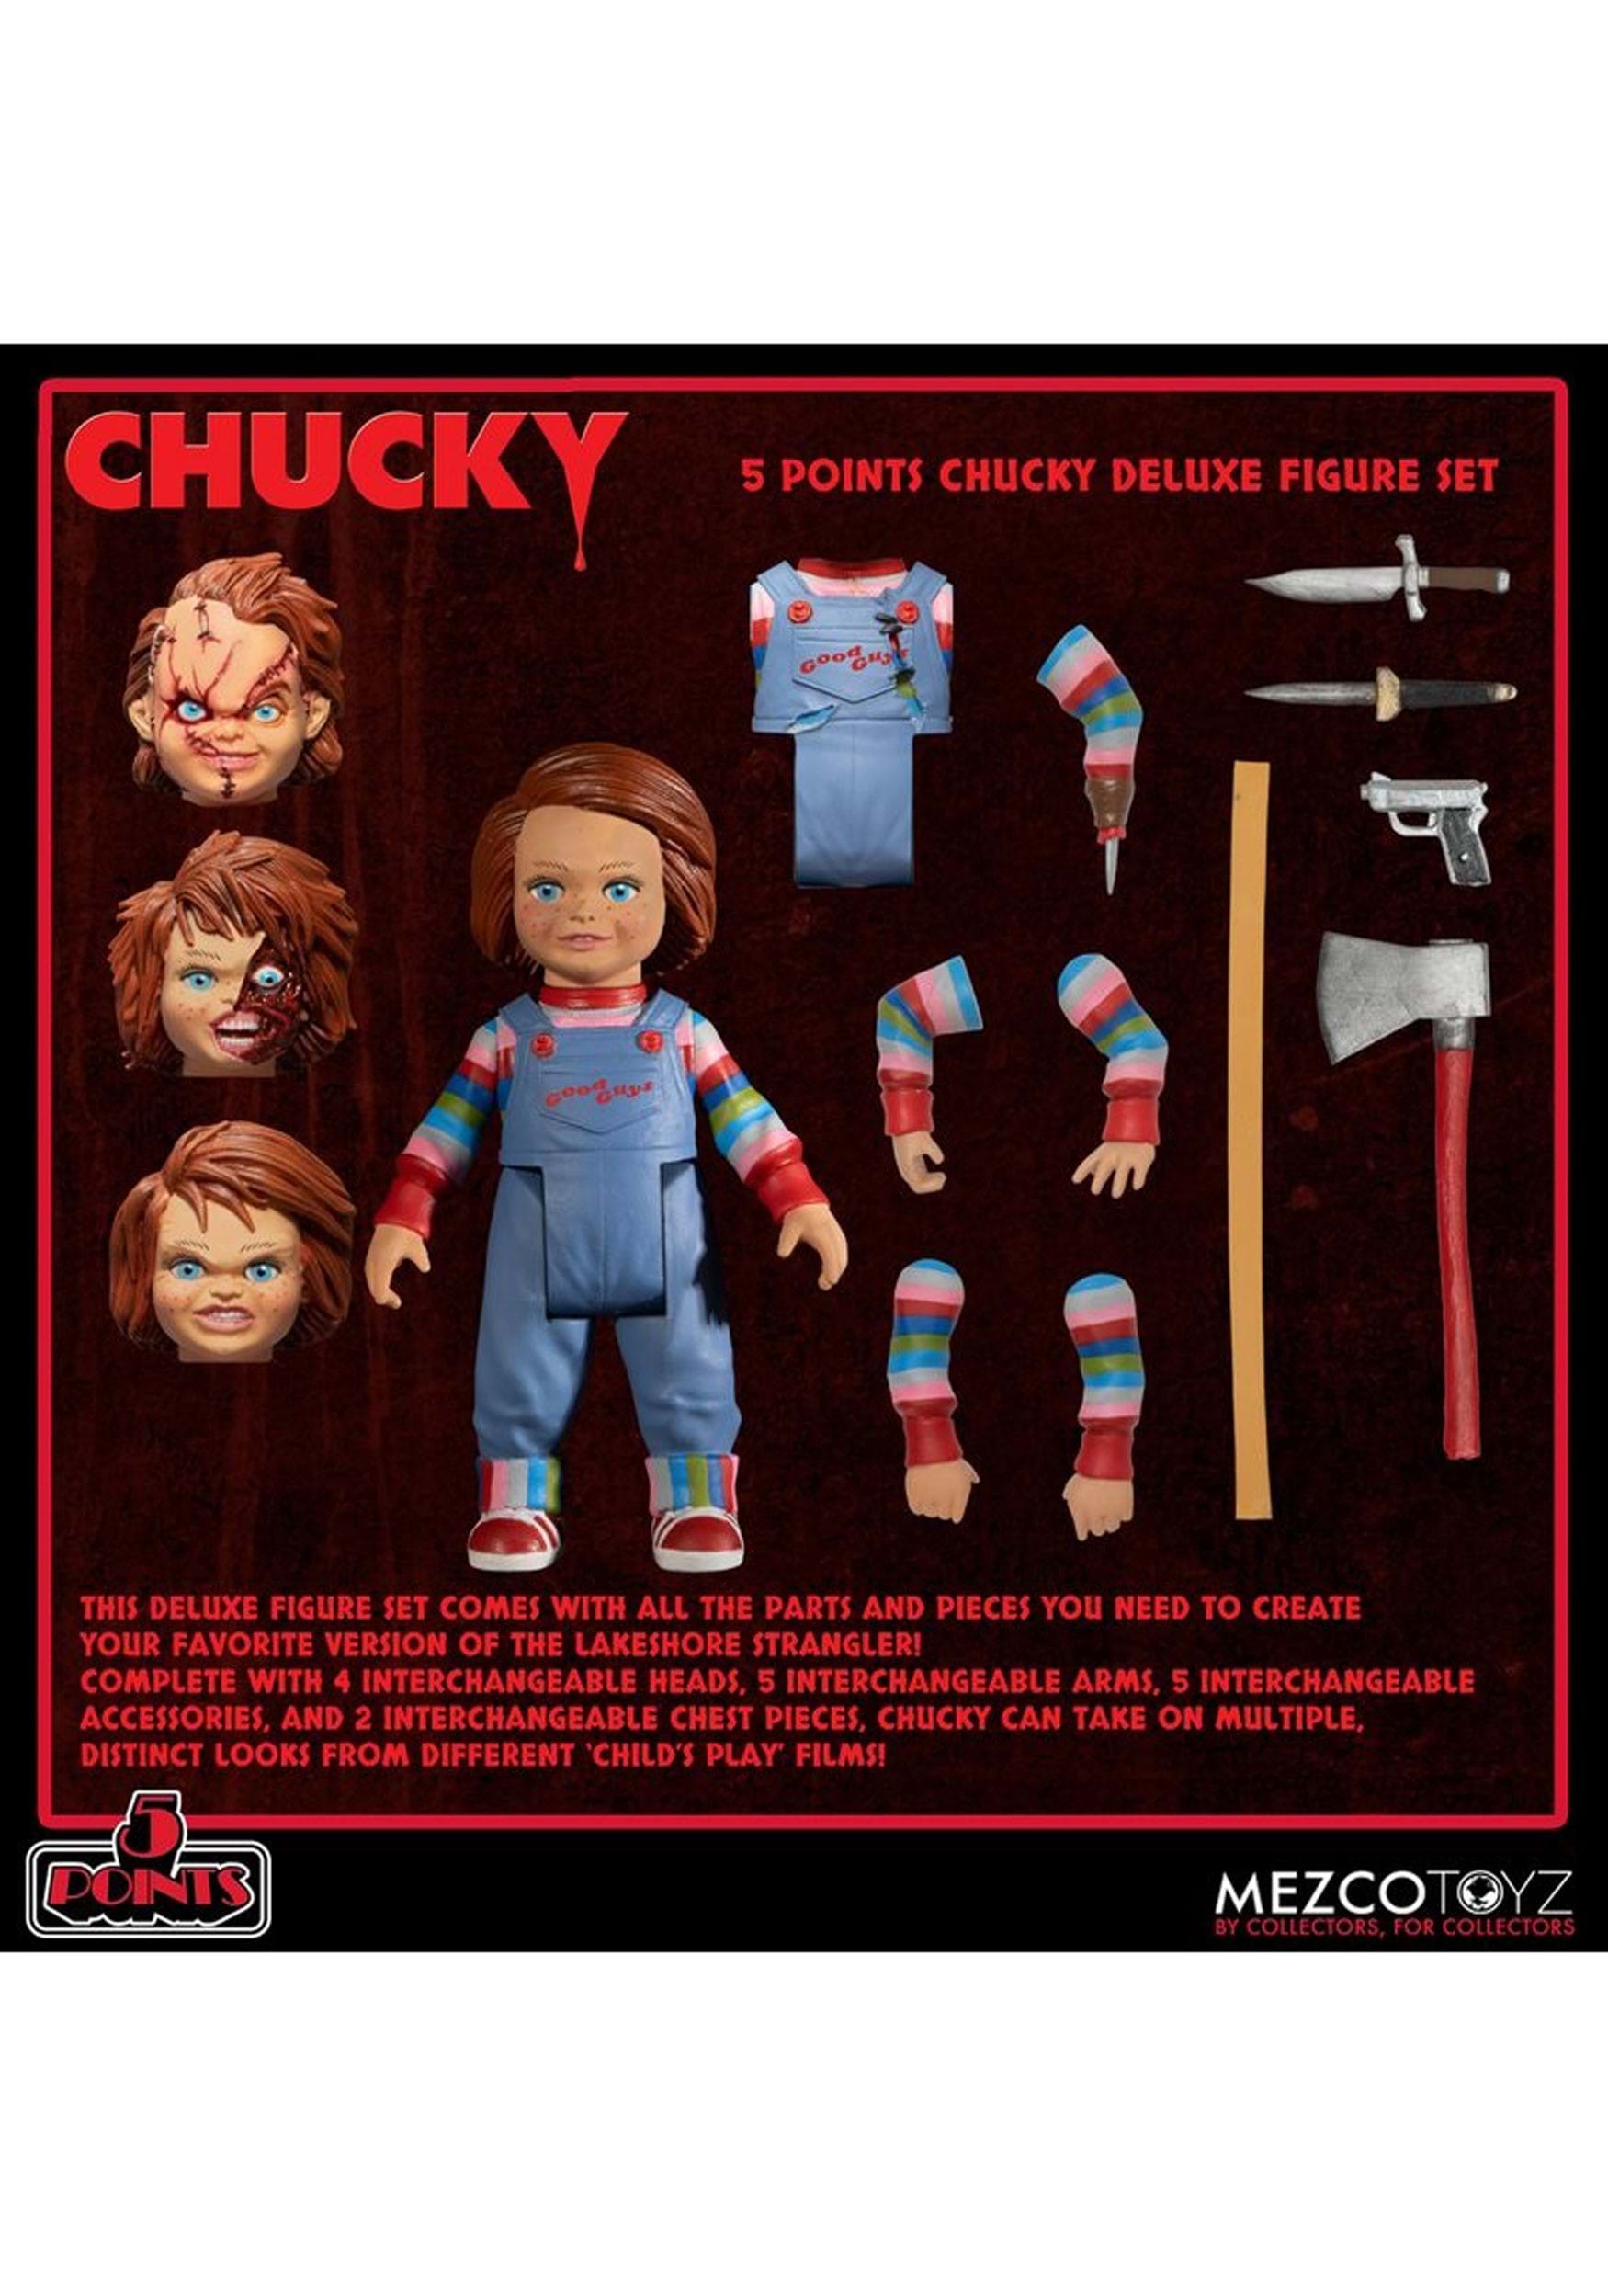 https://images.fun.com/products/88905/2-1-250829/5-points-chucky-deluxe-figure-set-alt-1.jpg